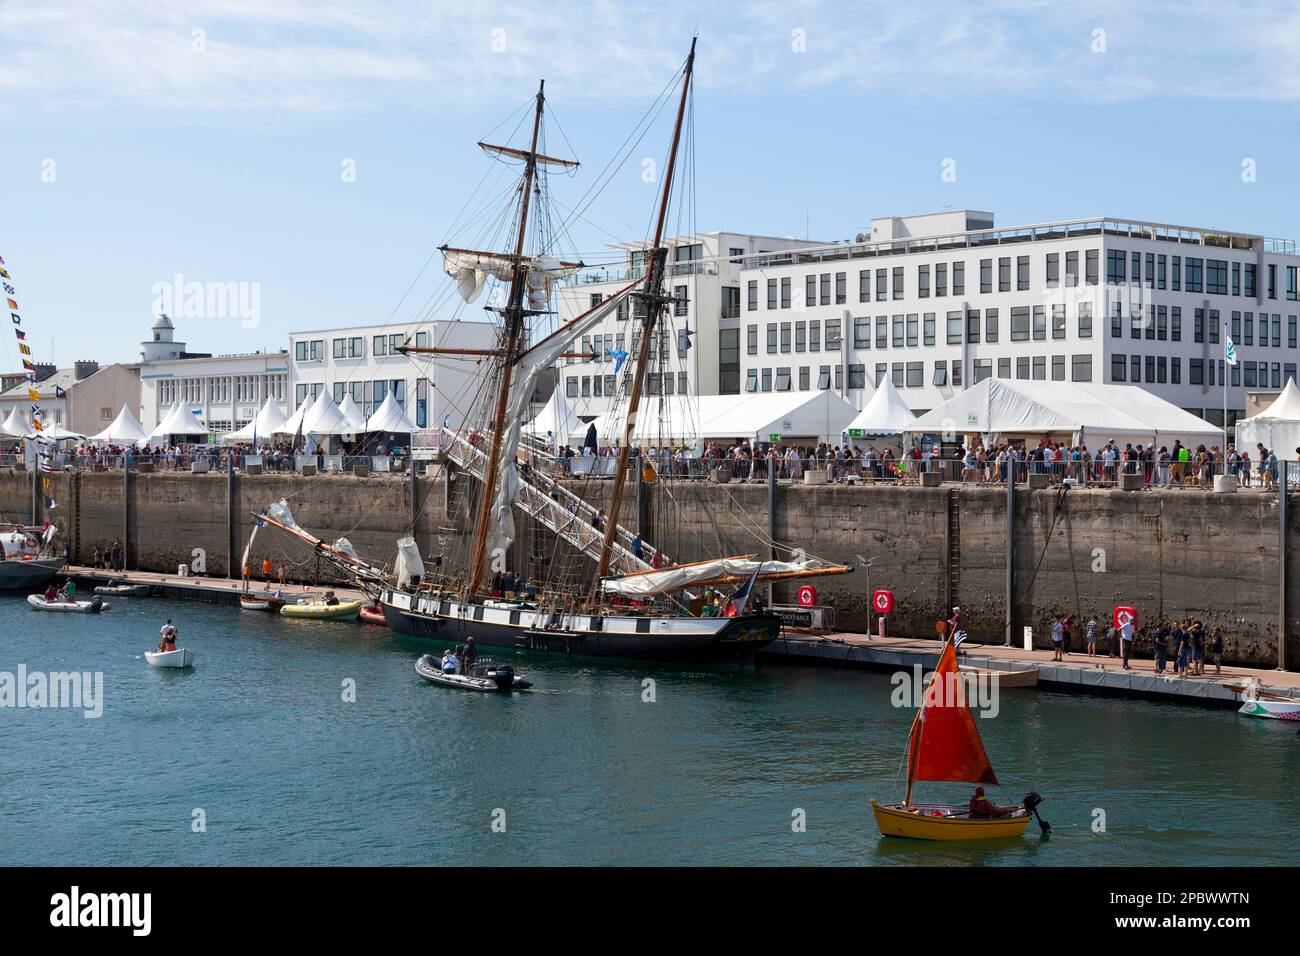 Brest, France - July 14 2022: La Recouvrance is a replica gaff rigged schooner, named in honour of Recouvrance, one of the districts of Brest. Stock Photo